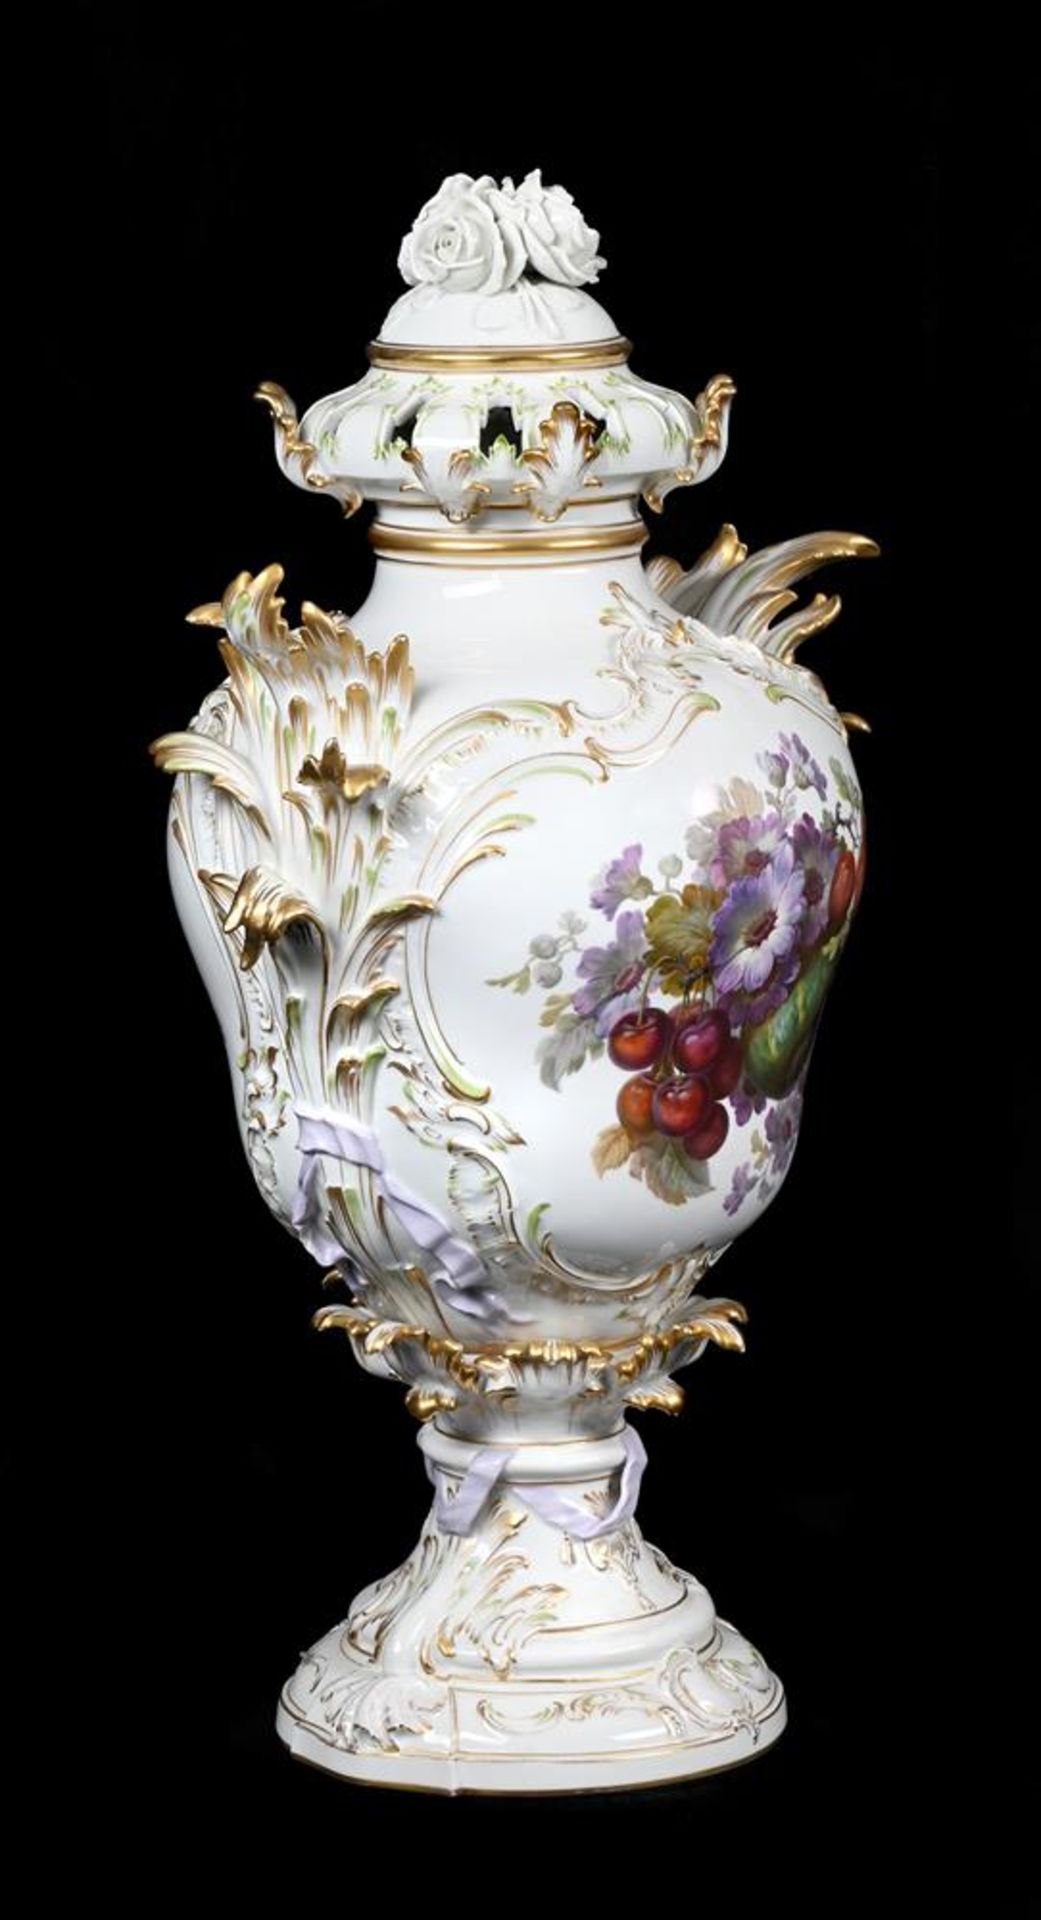 A BERLIN (KPM) TWO-HANDLED VASE AND PIERCED COVER, CIRCA 1900 - Image 3 of 6